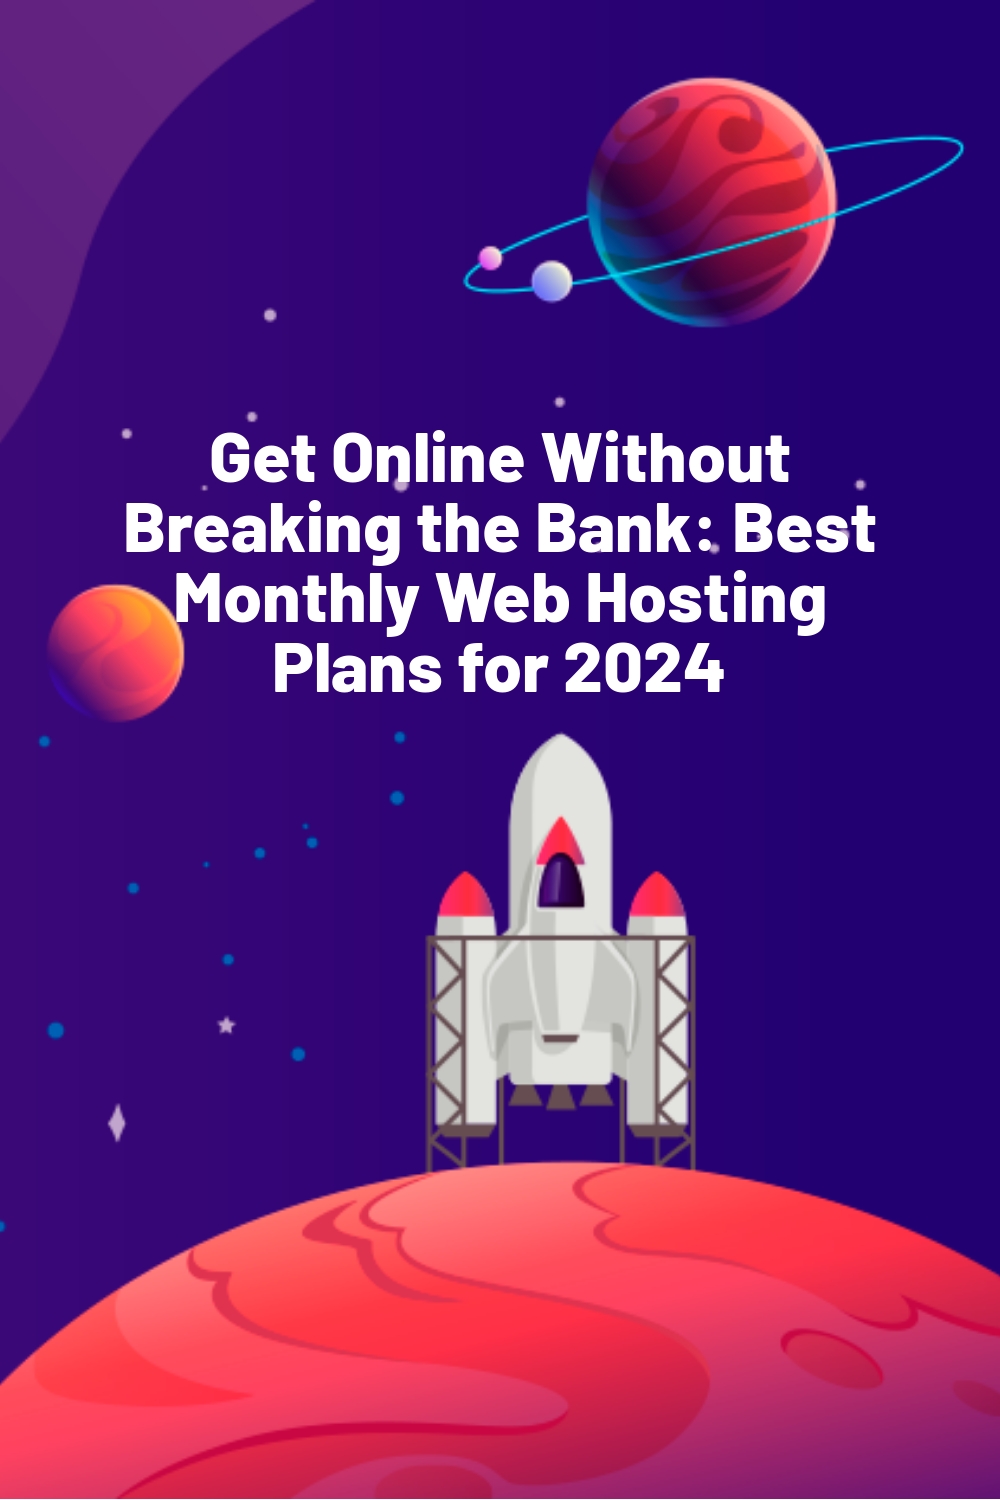 Get Online Without Breaking the Bank: Best Monthly Web Hosting Plans for 2024